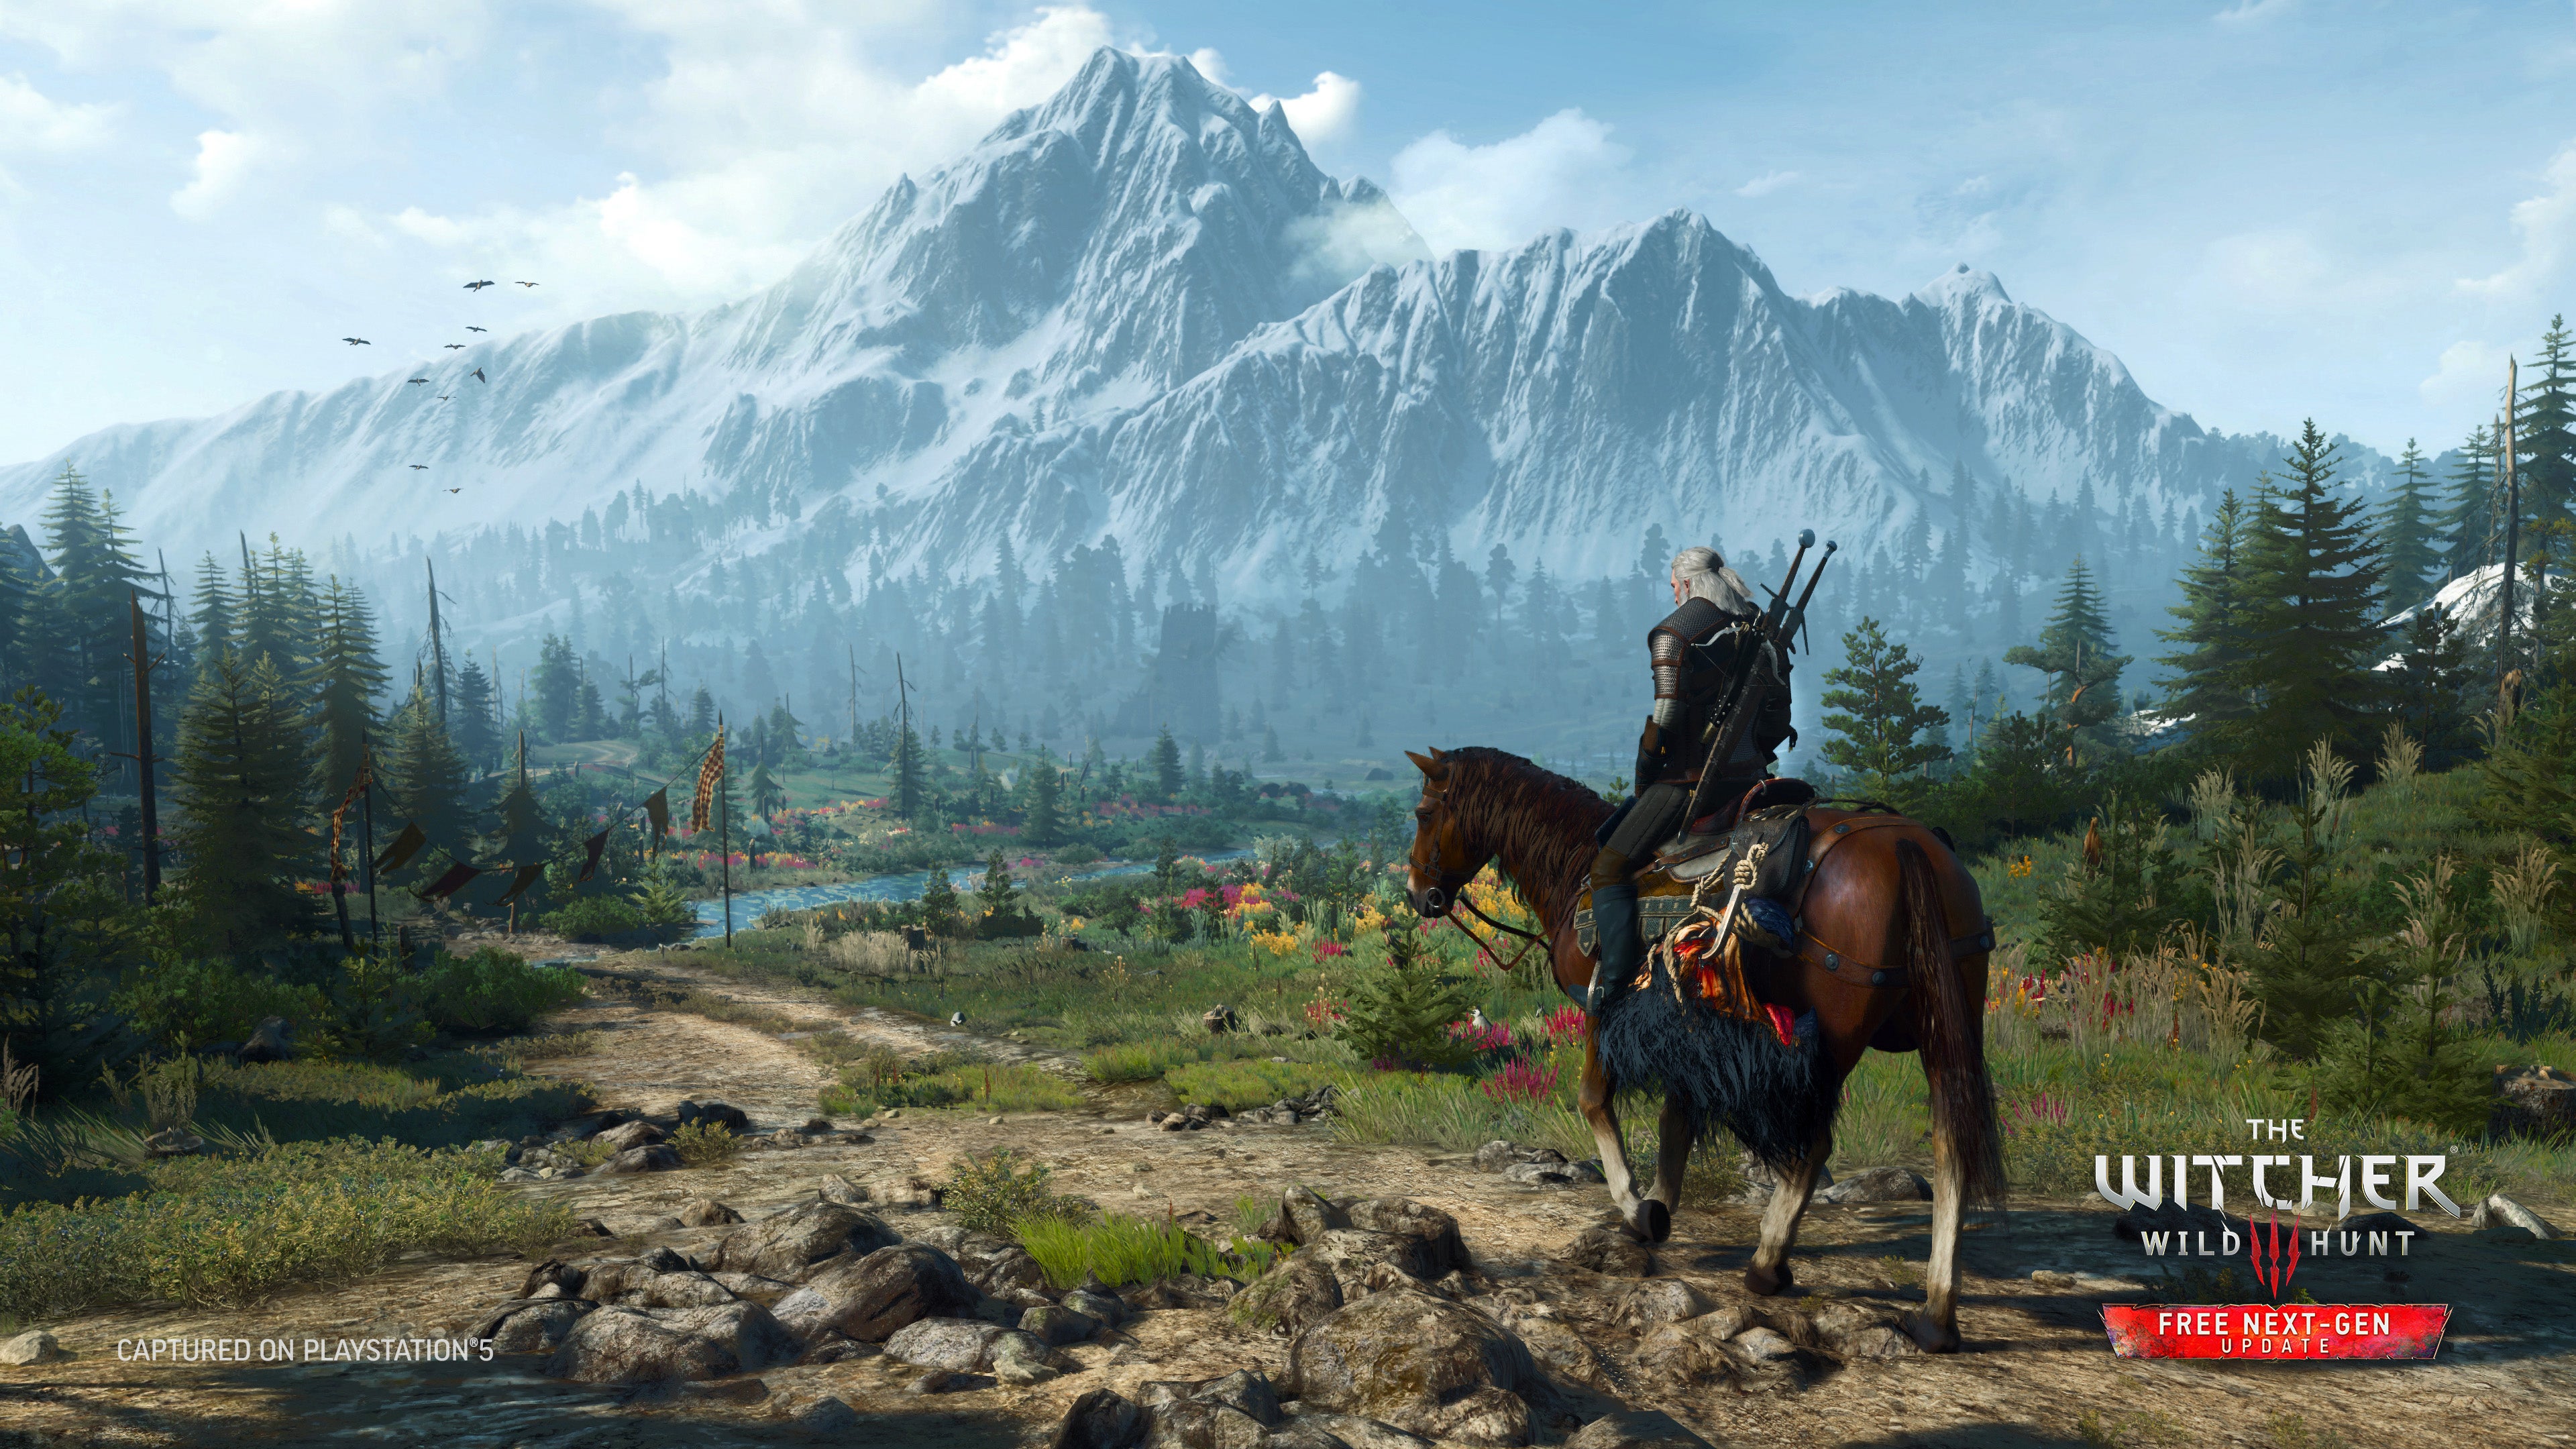 The witcher Geralt on his horse Roach, on a rocky, mountain road, with a snow-capped mountain in the background. I can almost taste the clean air from here.